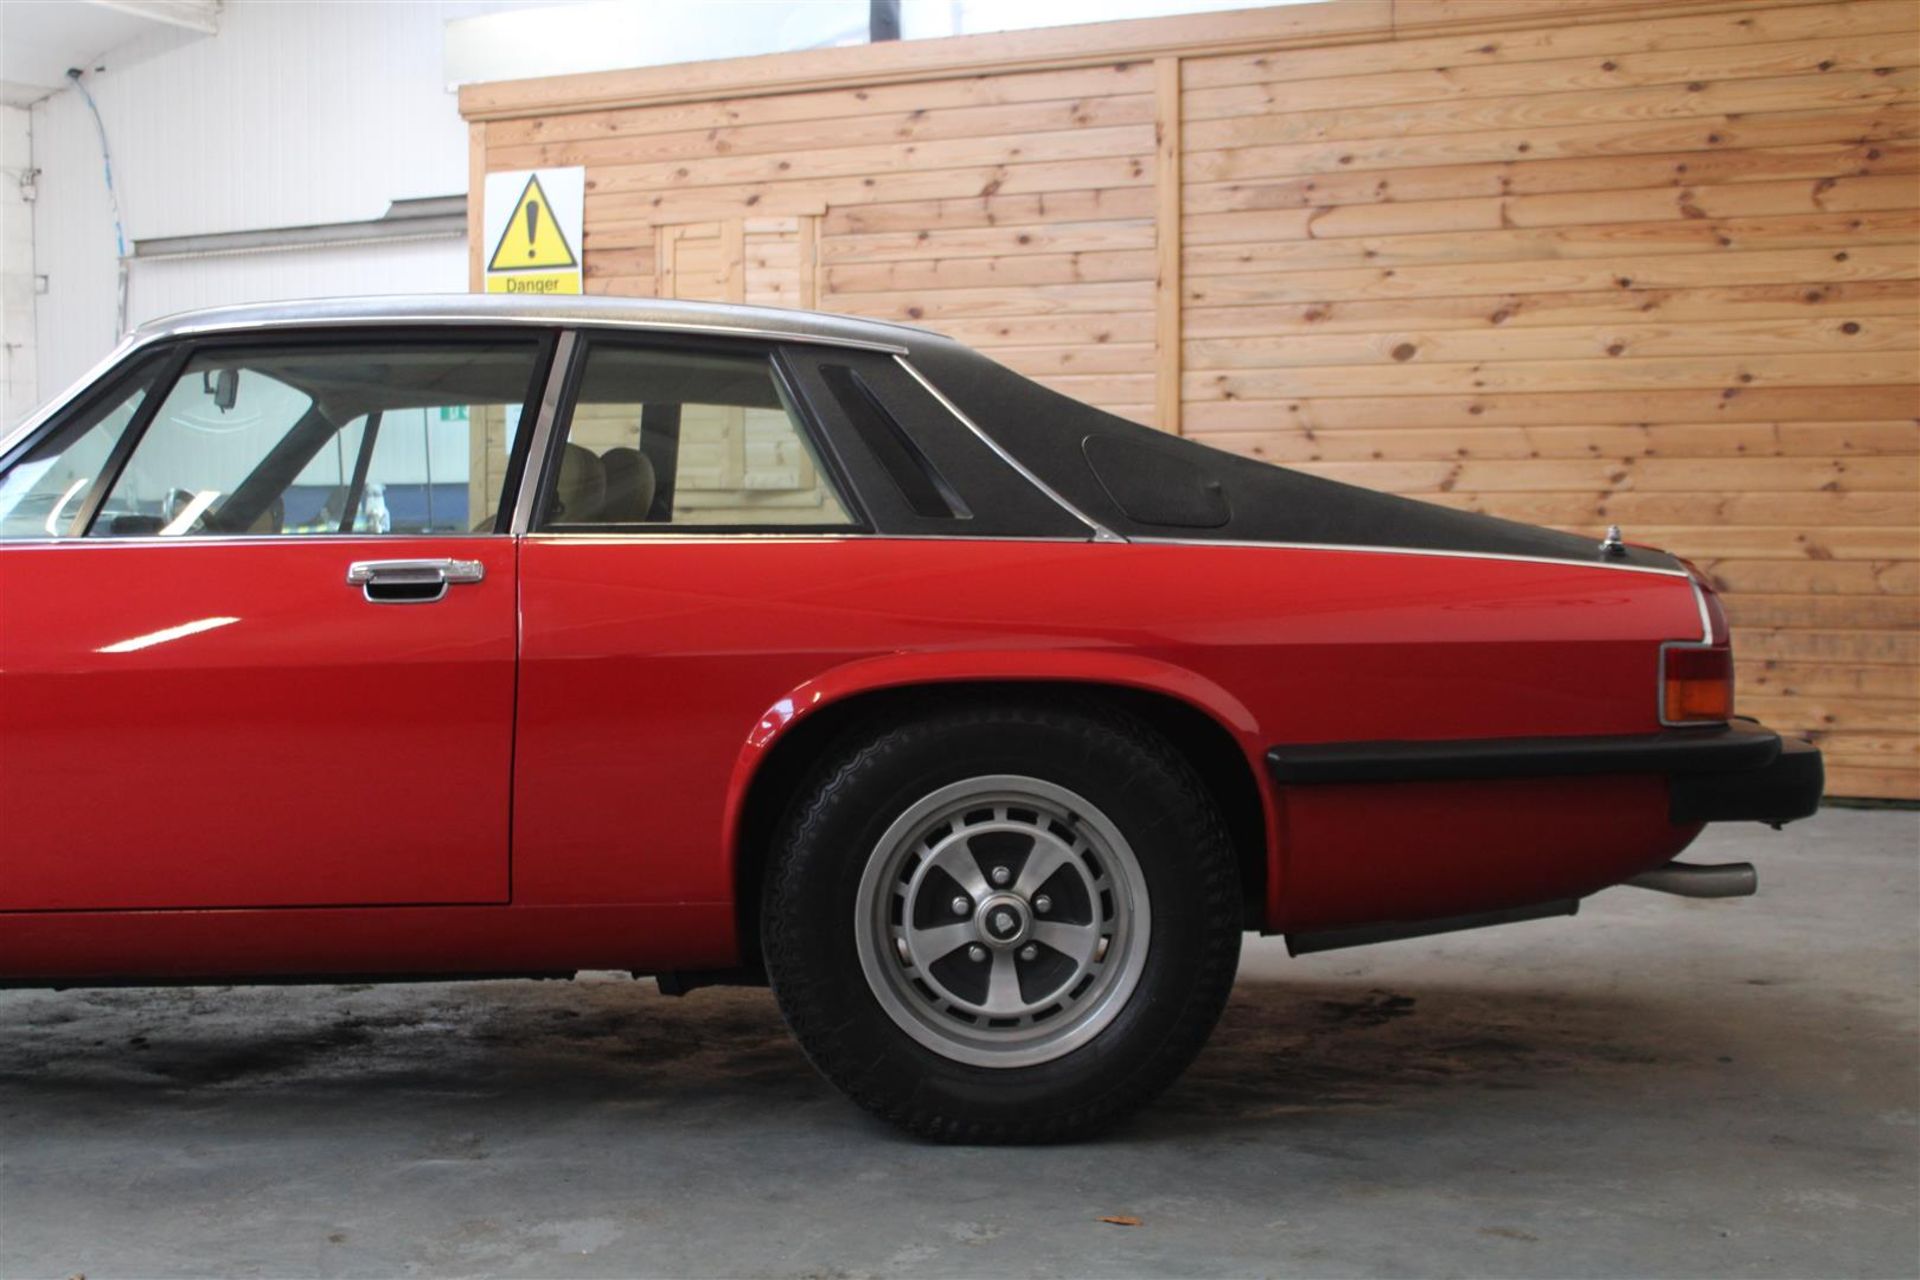 1976 Jaguar XJ-S 5.3 V12 Coupe Auto 29,030 miles from new - Image 7 of 23